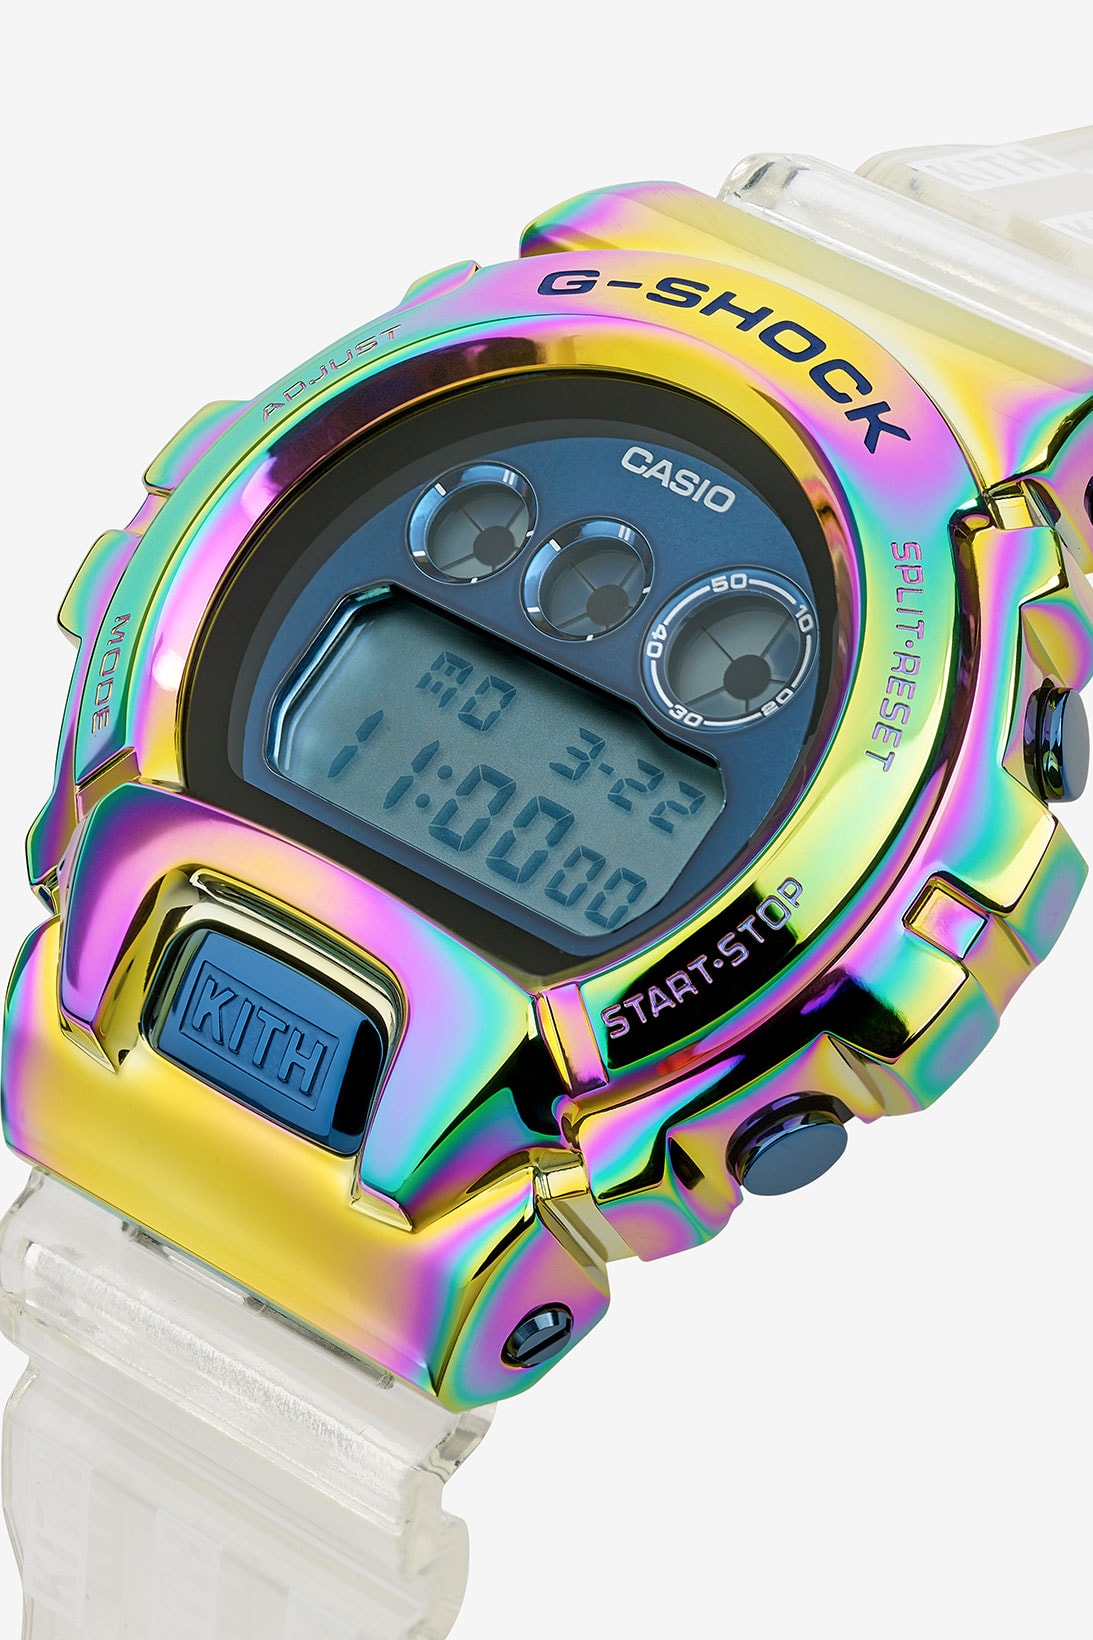 kith g-shock gm-6900 rainbow watches collaboration face details digital